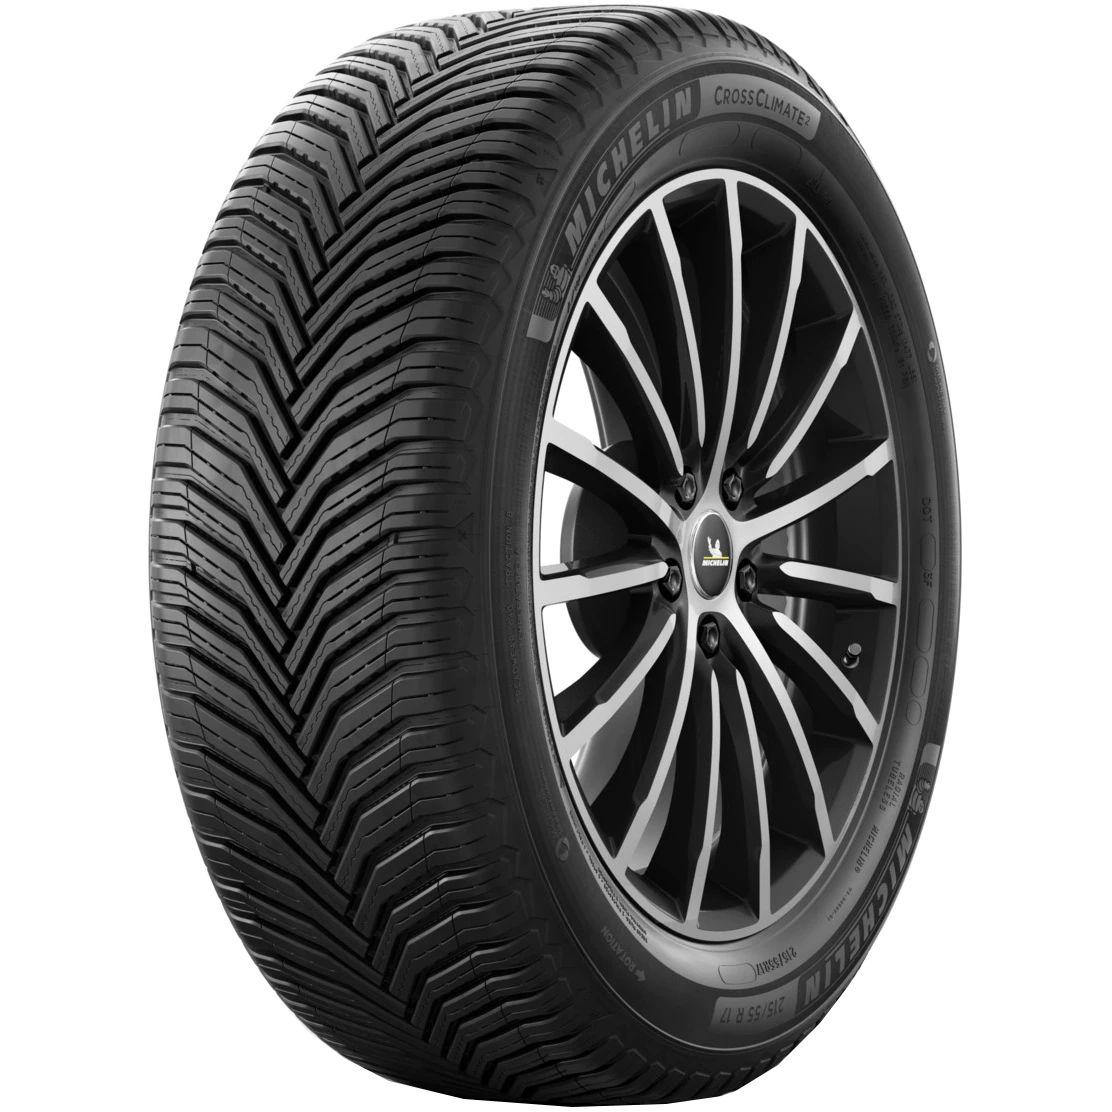 Anvelope all seasons MICHELIN CrossClimate2 M+S 215/60 R17 96H